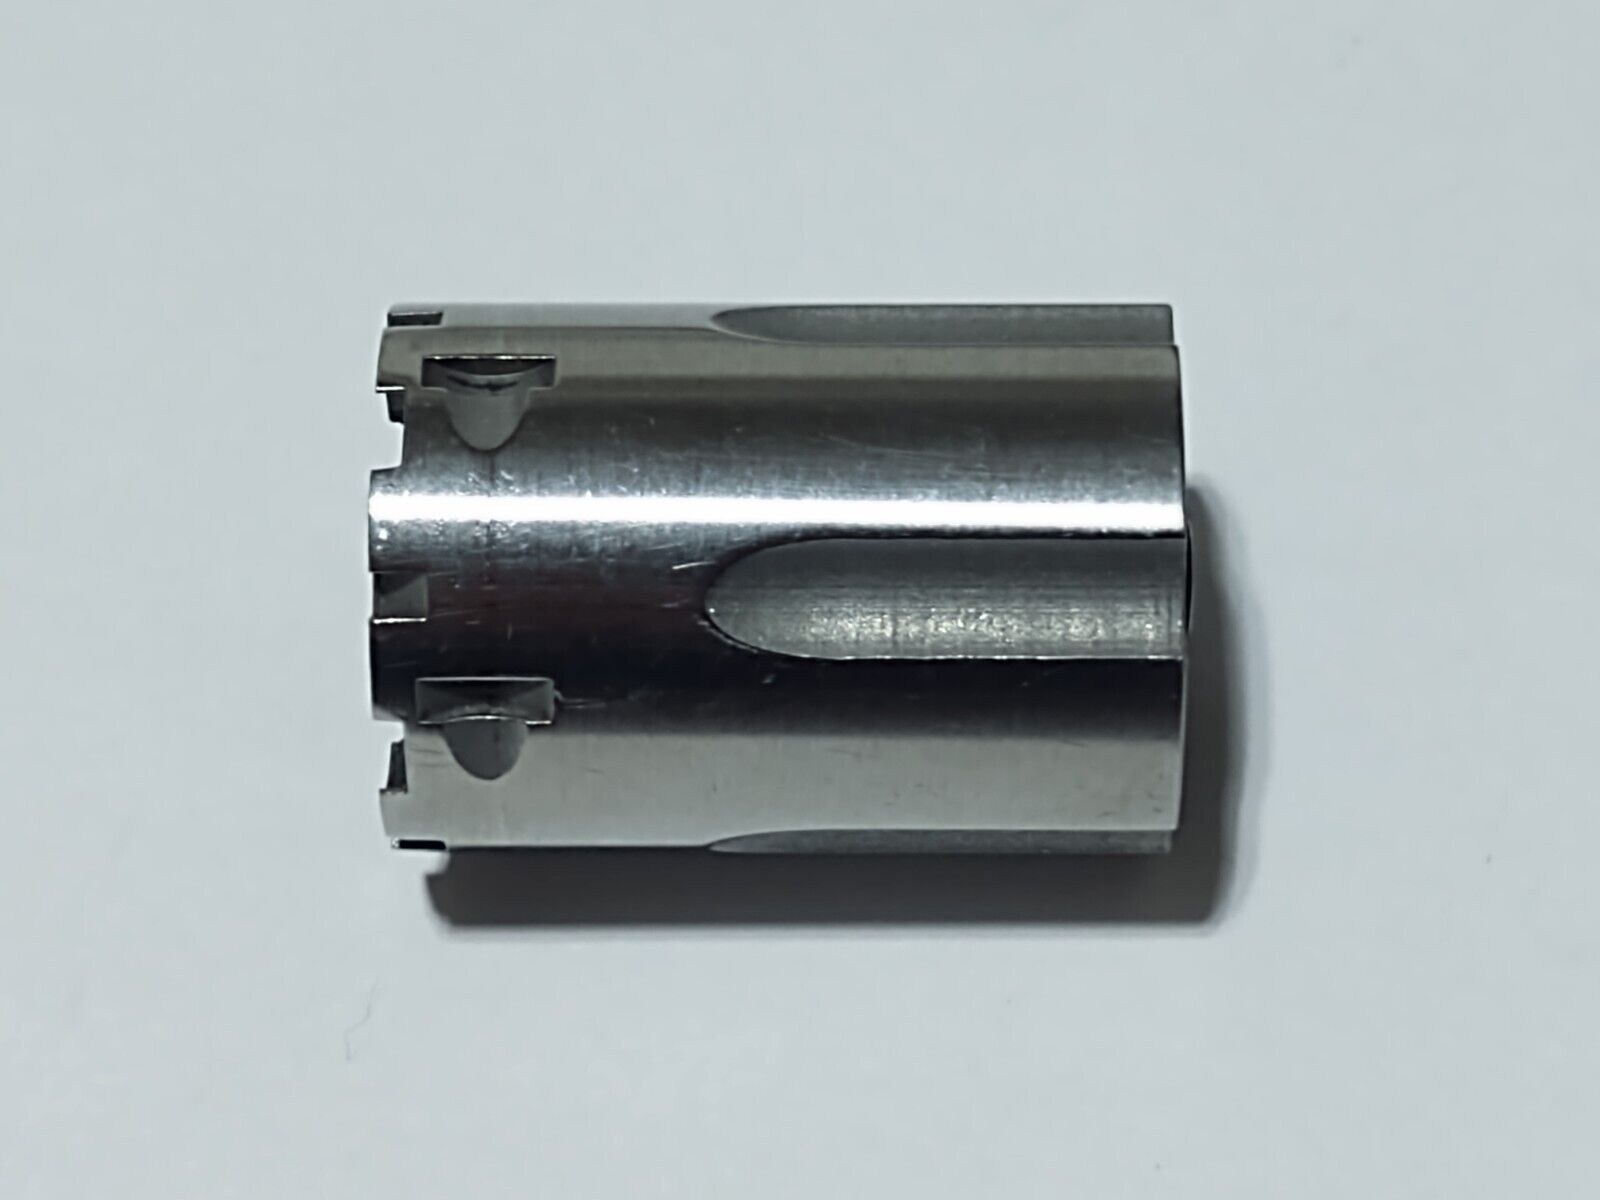 North American Arms .22 LR Cylinder for 22LR Mini Revolvers, NAA-22LR models 